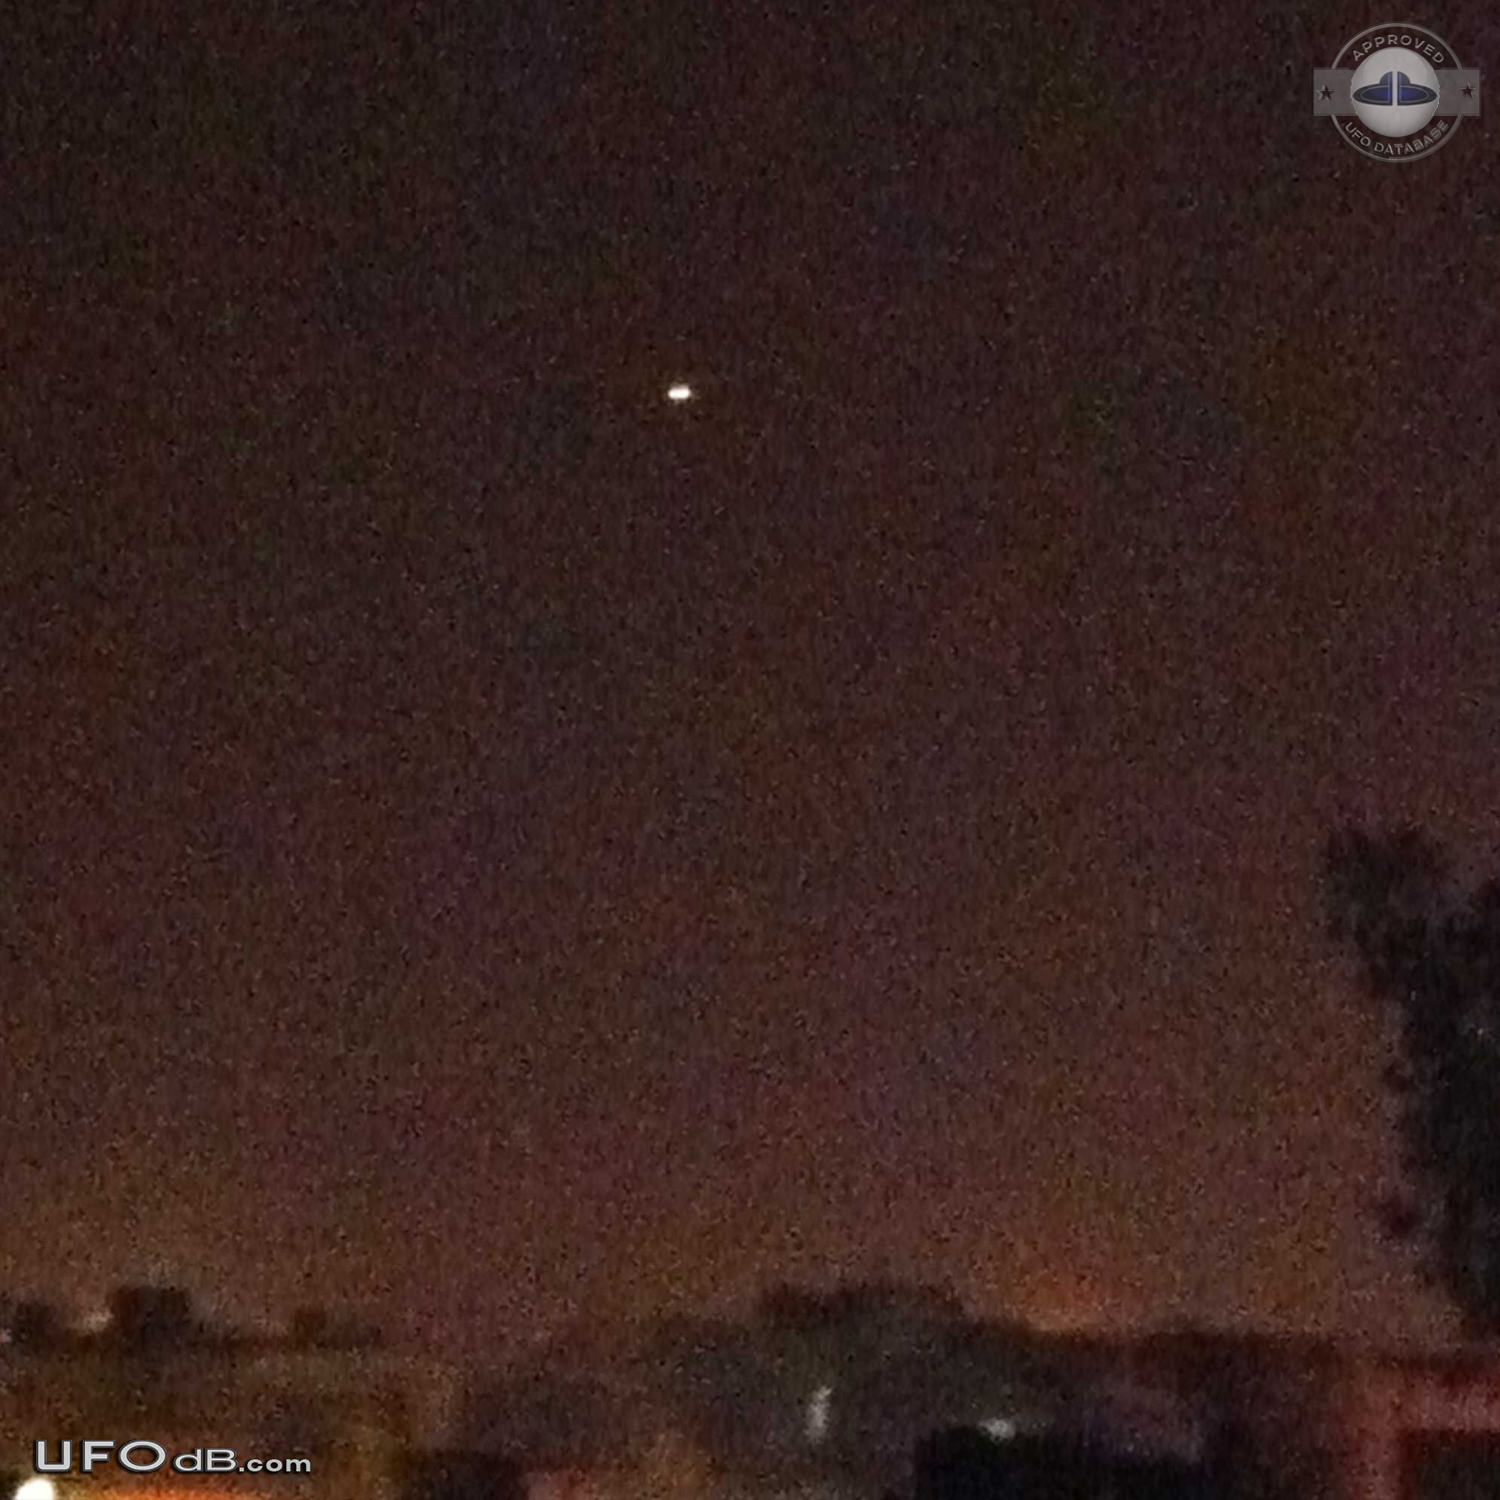 Sphere UFOs appear beside Fireworks during Diwali in New Delhi - 2011 UFO Picture #475-4